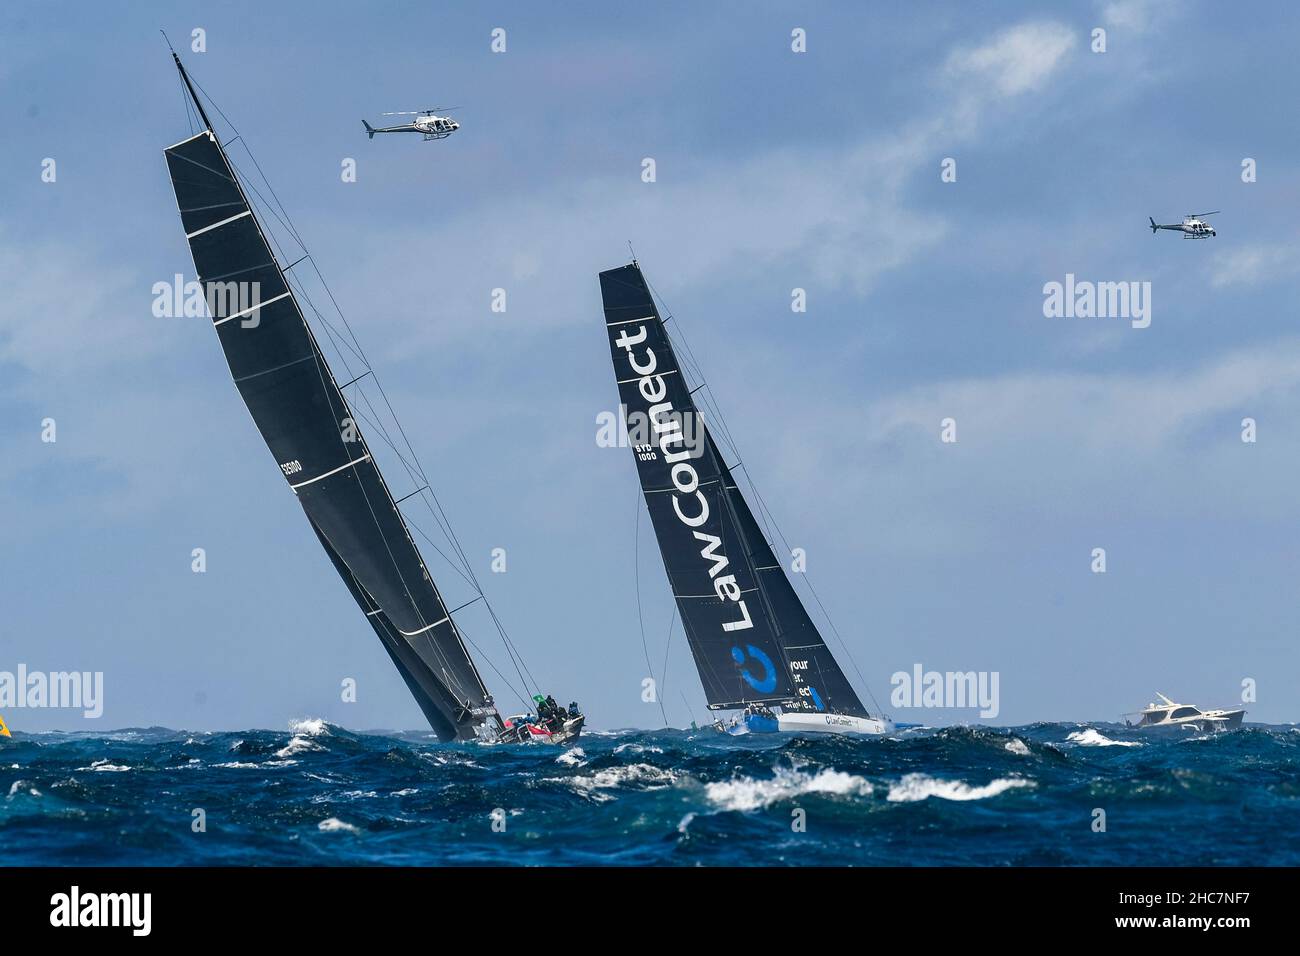 Sydney Harbour, Sydney, Australia. 26th Dec, 2021. Rolex Sydney Hobart  Yacht Race; BLACK JACK skippered by Mark Bradford and LAWCONNECT skippered  by Christian Beck leave the Heads and turn south towards Hobart